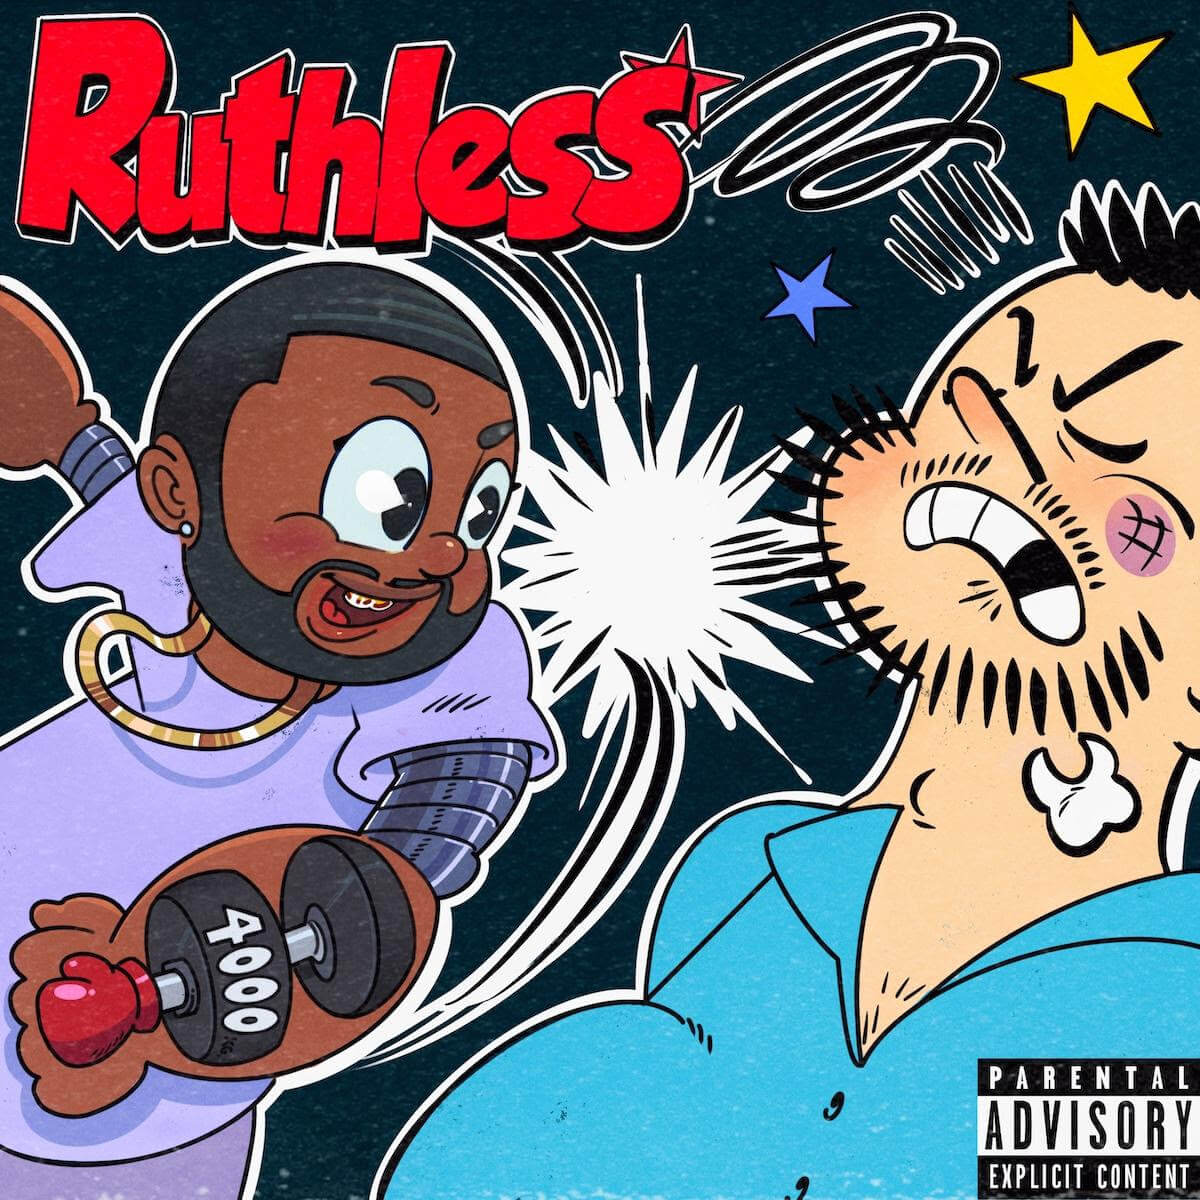 Guapdad 4000 has dropped "Ruthless." The track was Produced by James Delgado, and is about Guapdad's ability to make a lot of money